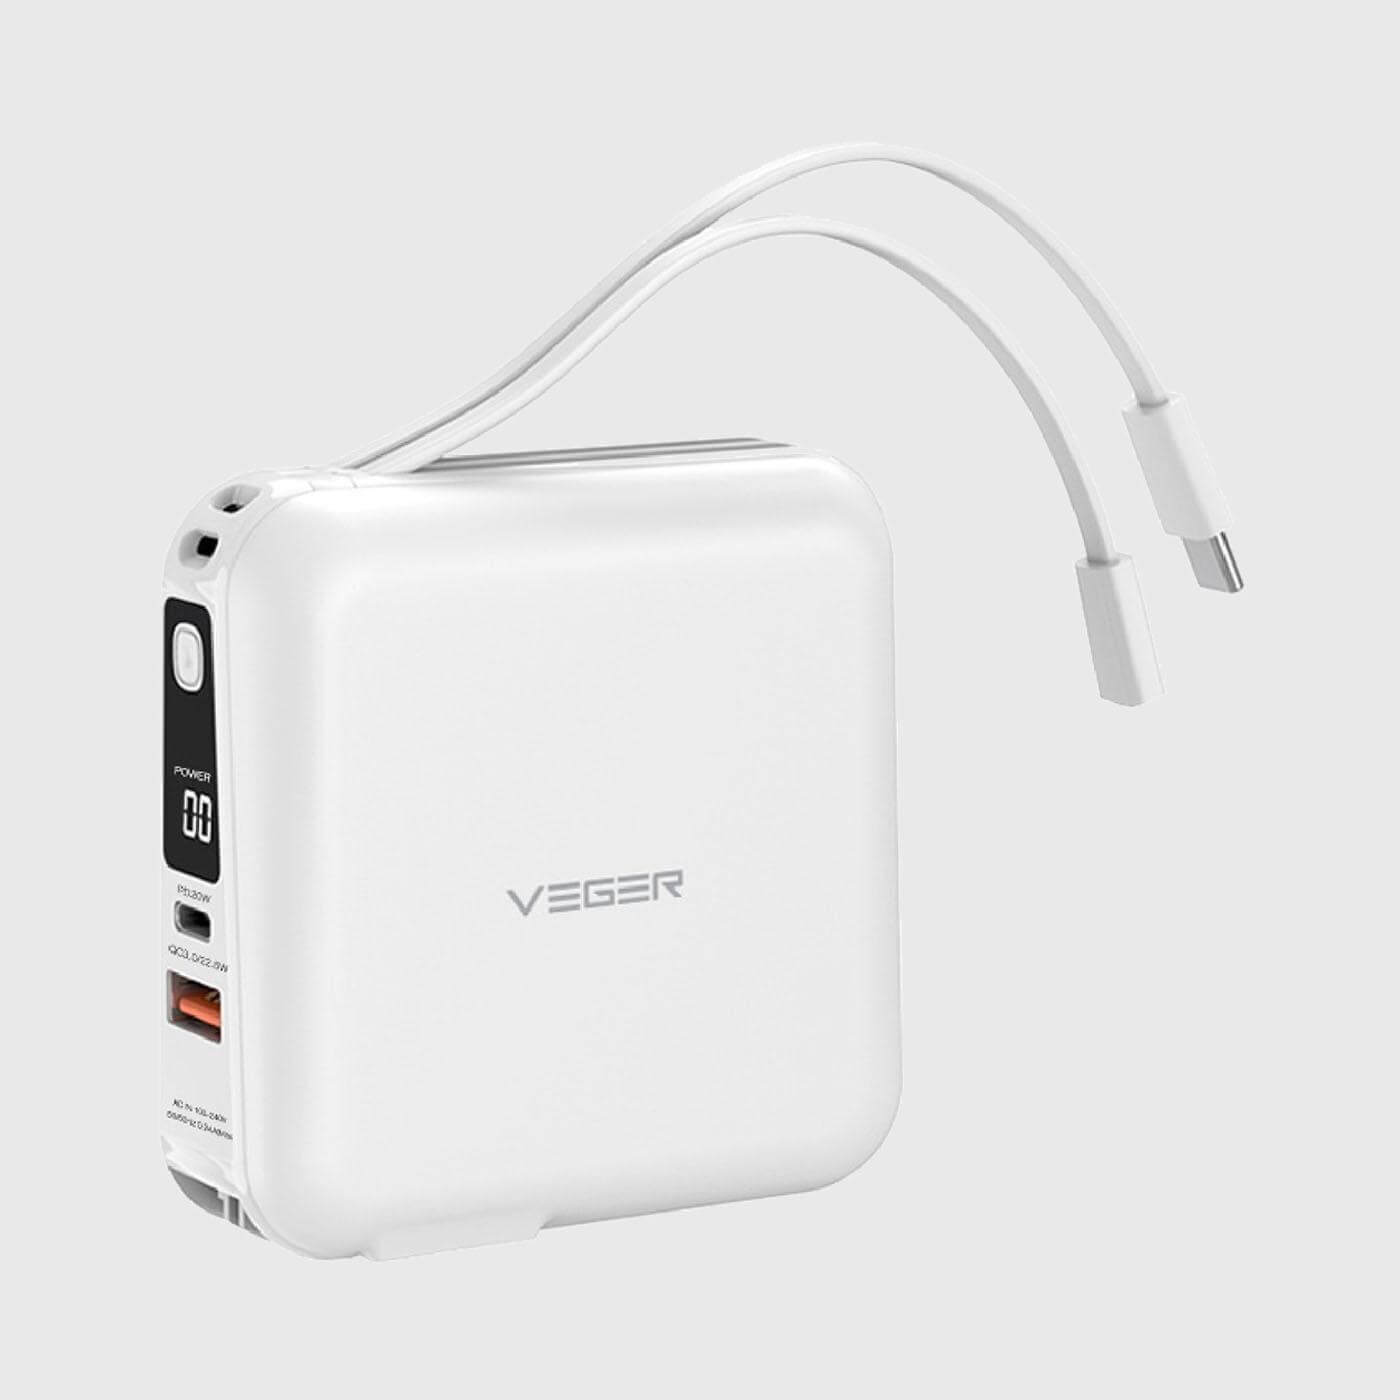 Veger W1001W 10,000 mAh wireless charging, PD/PPS20W, QC3.0,built-incable and adapter, digital display - White_免税价格_亿点免税